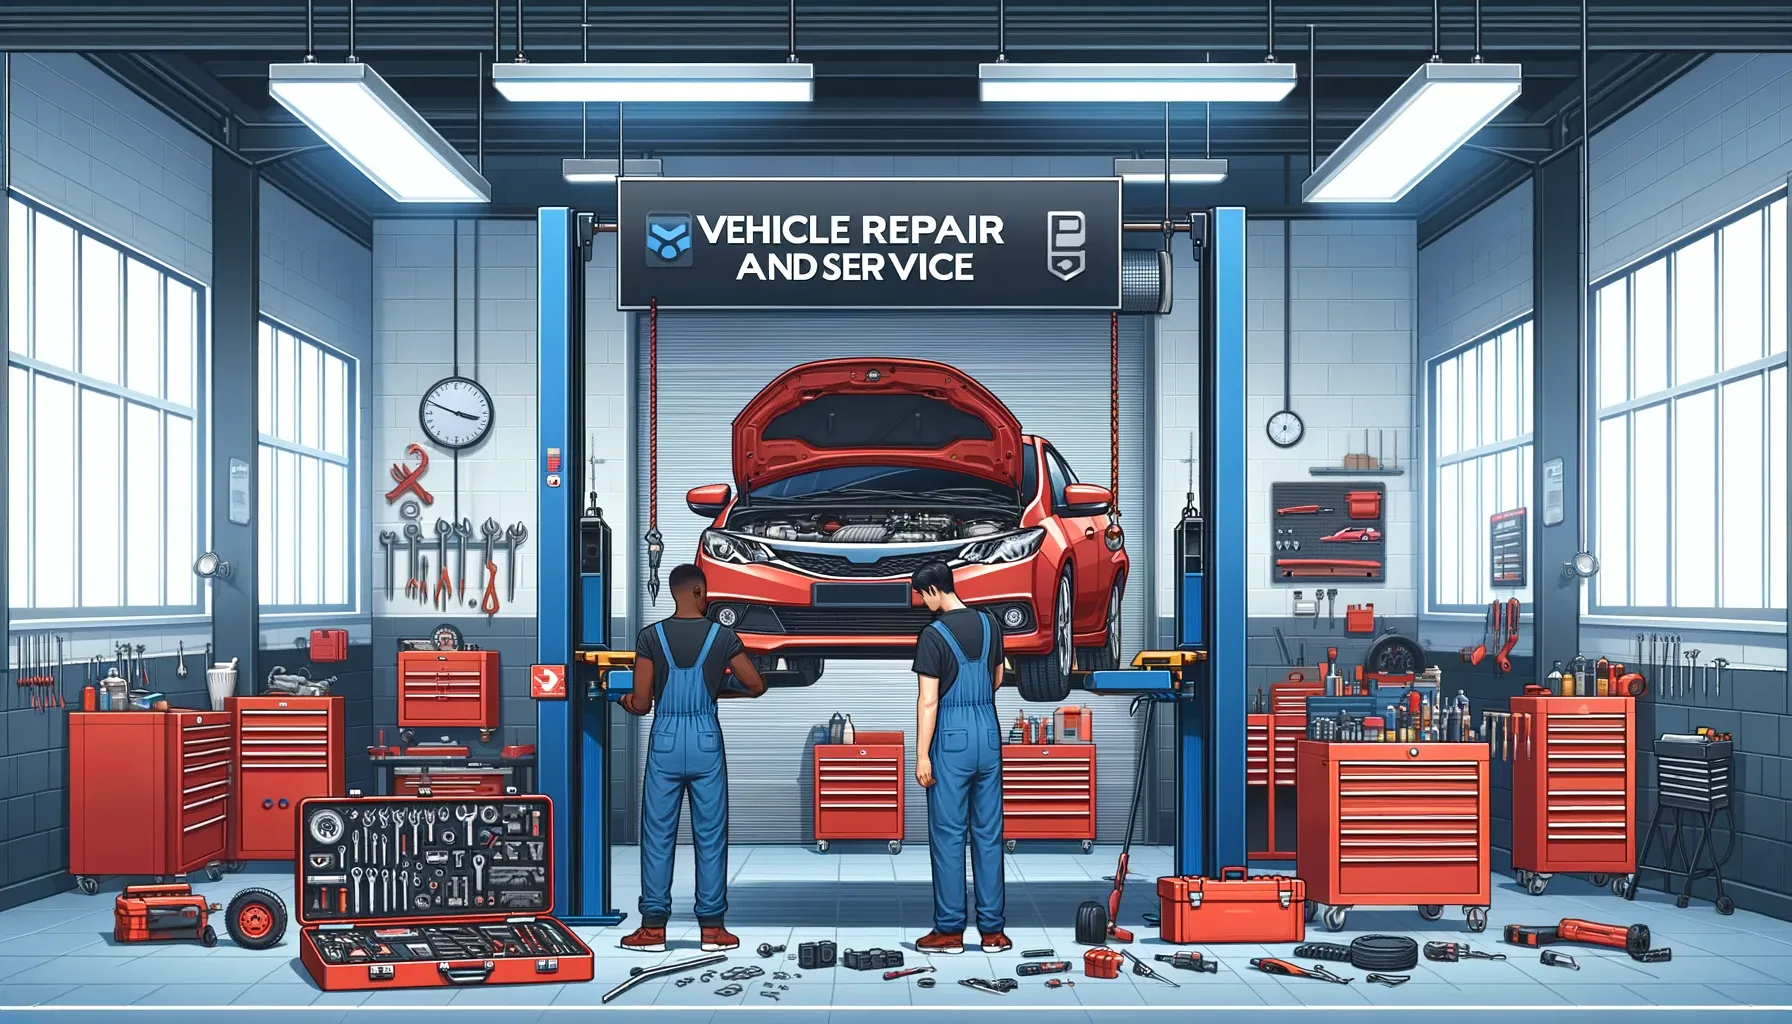 One-Stop Shop for All Your Vehicle Repair and Service Needs